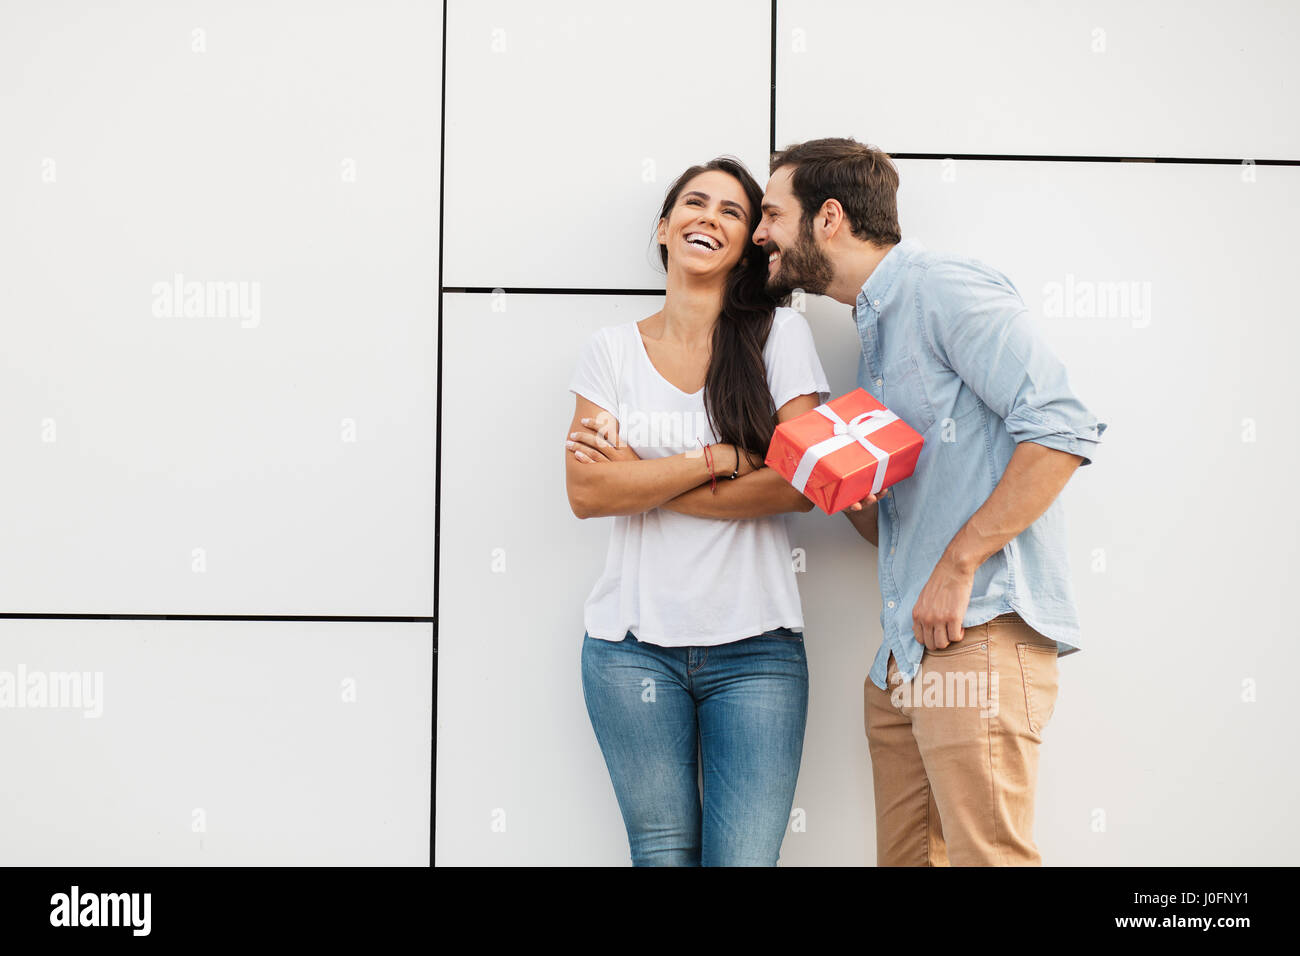 young man trying to reconcile his girlfriend offering her a gift Stock Photo